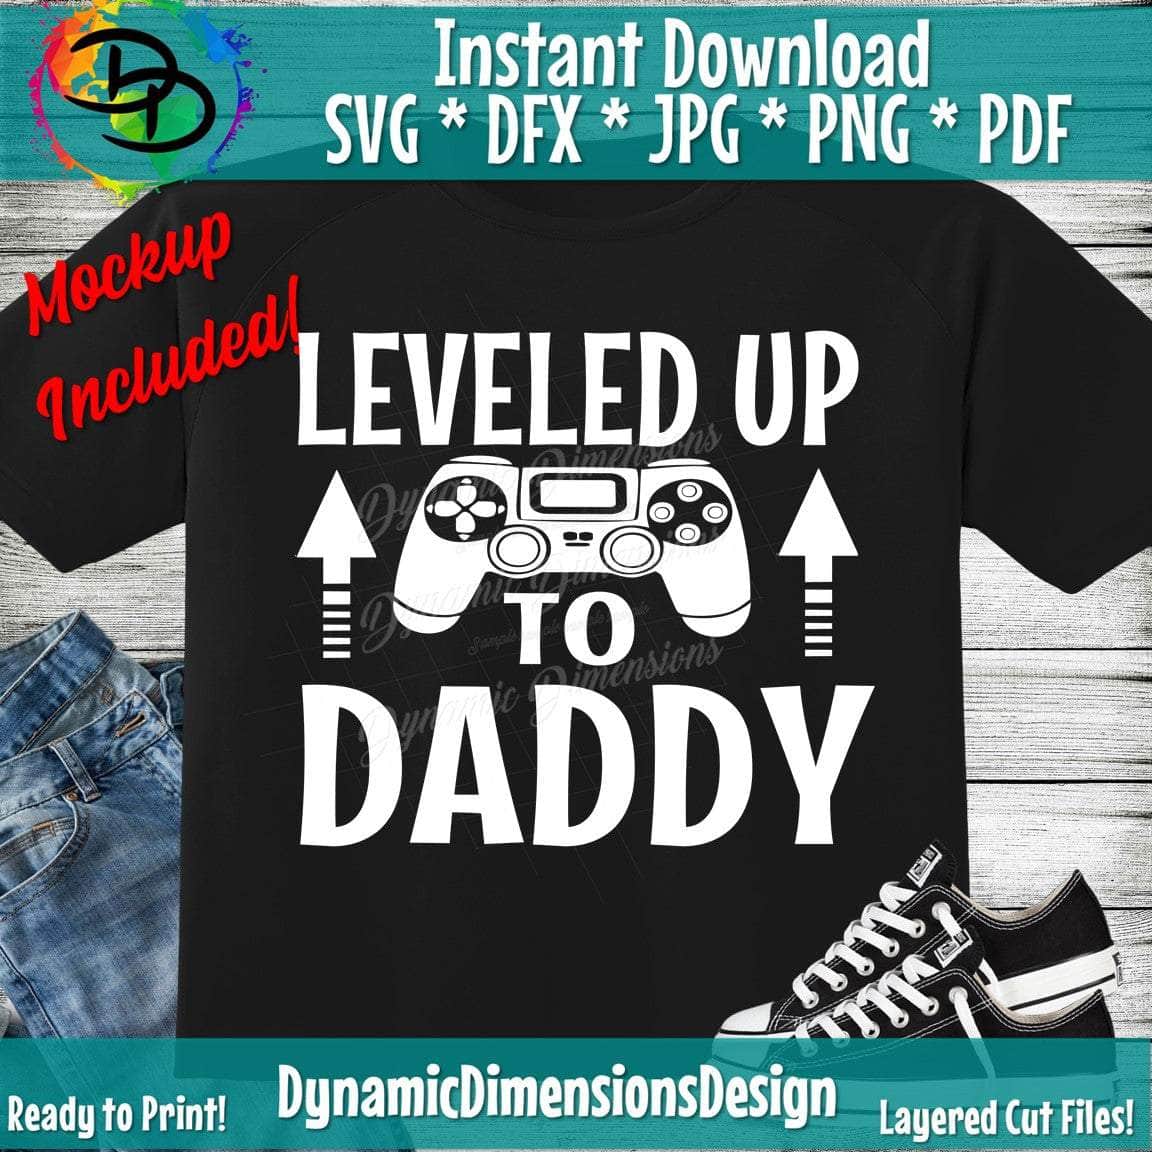 Leveled up to Daddy